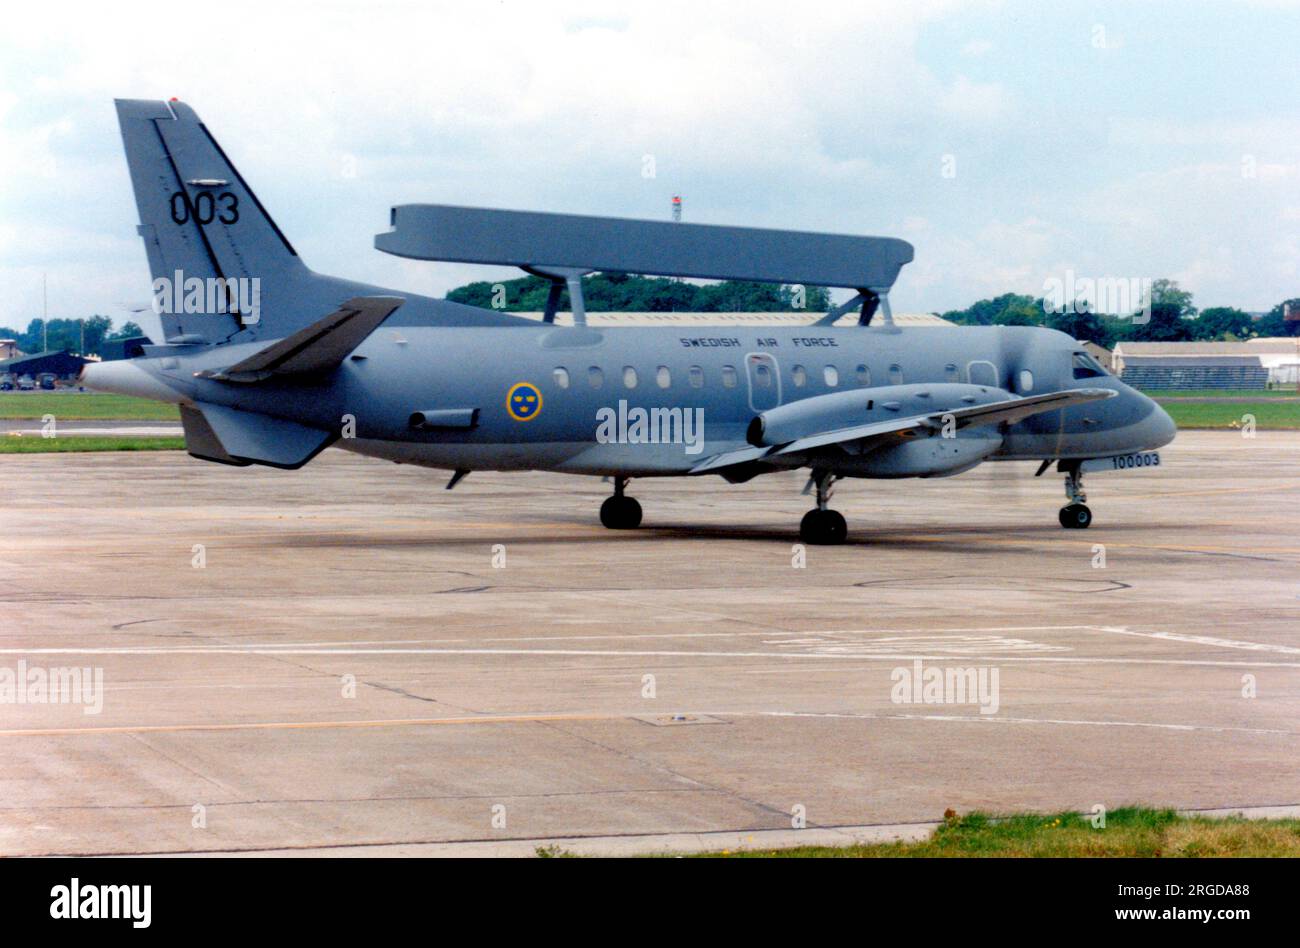 Flygvapnet - SAAB S100B Argus 100003 / 003 (msn 340-379 340AEW), at RAF Fairford on 25 July1998 for the Royal International Air Tattoo. (Flygvapnet - Swedish Air Force) Stock Photo